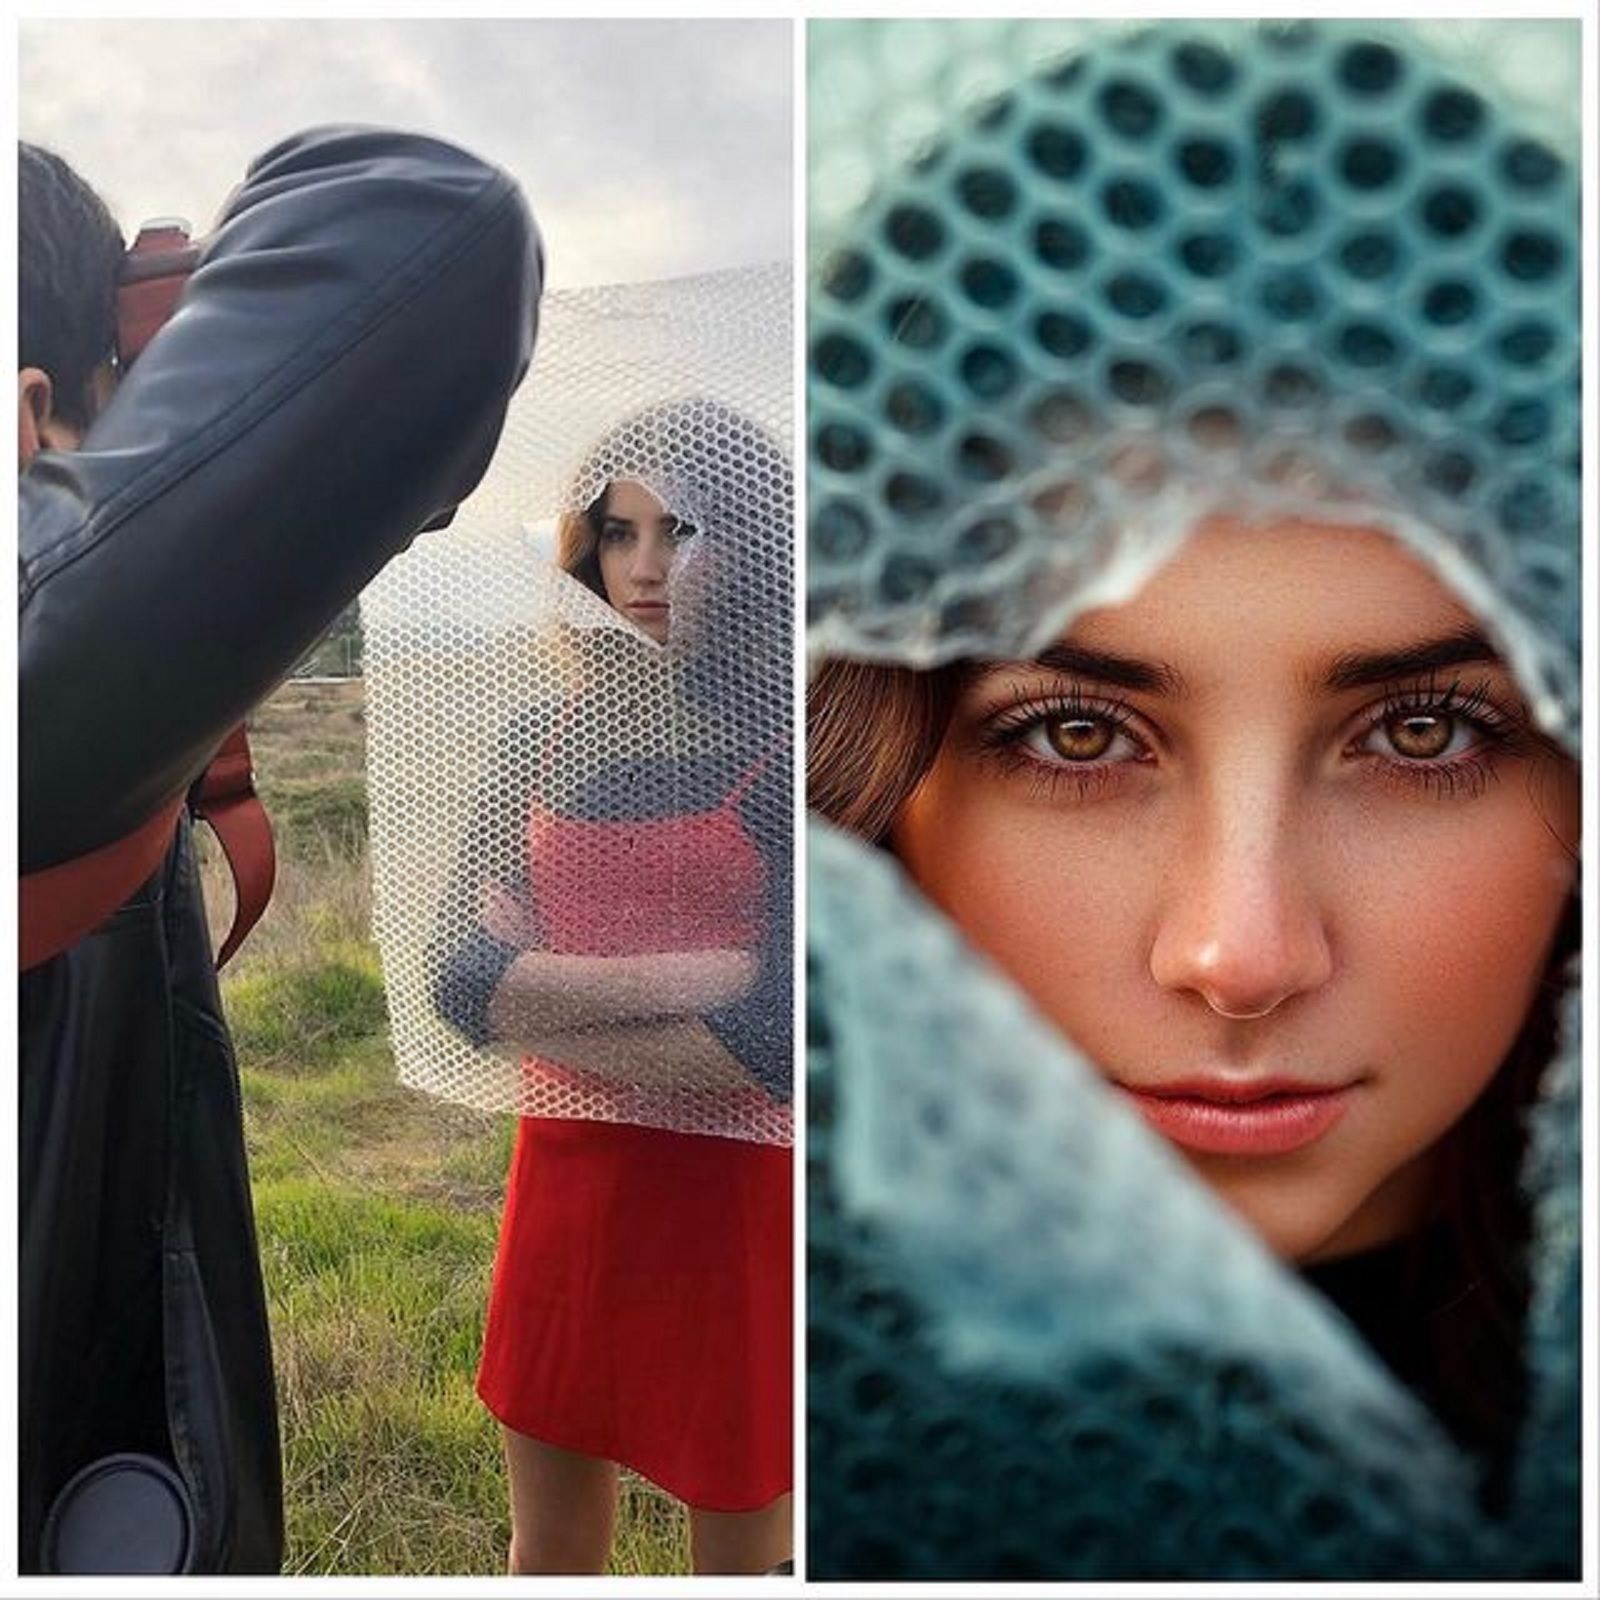 These hilarious images show how Instagrammers make their own reality photo 22